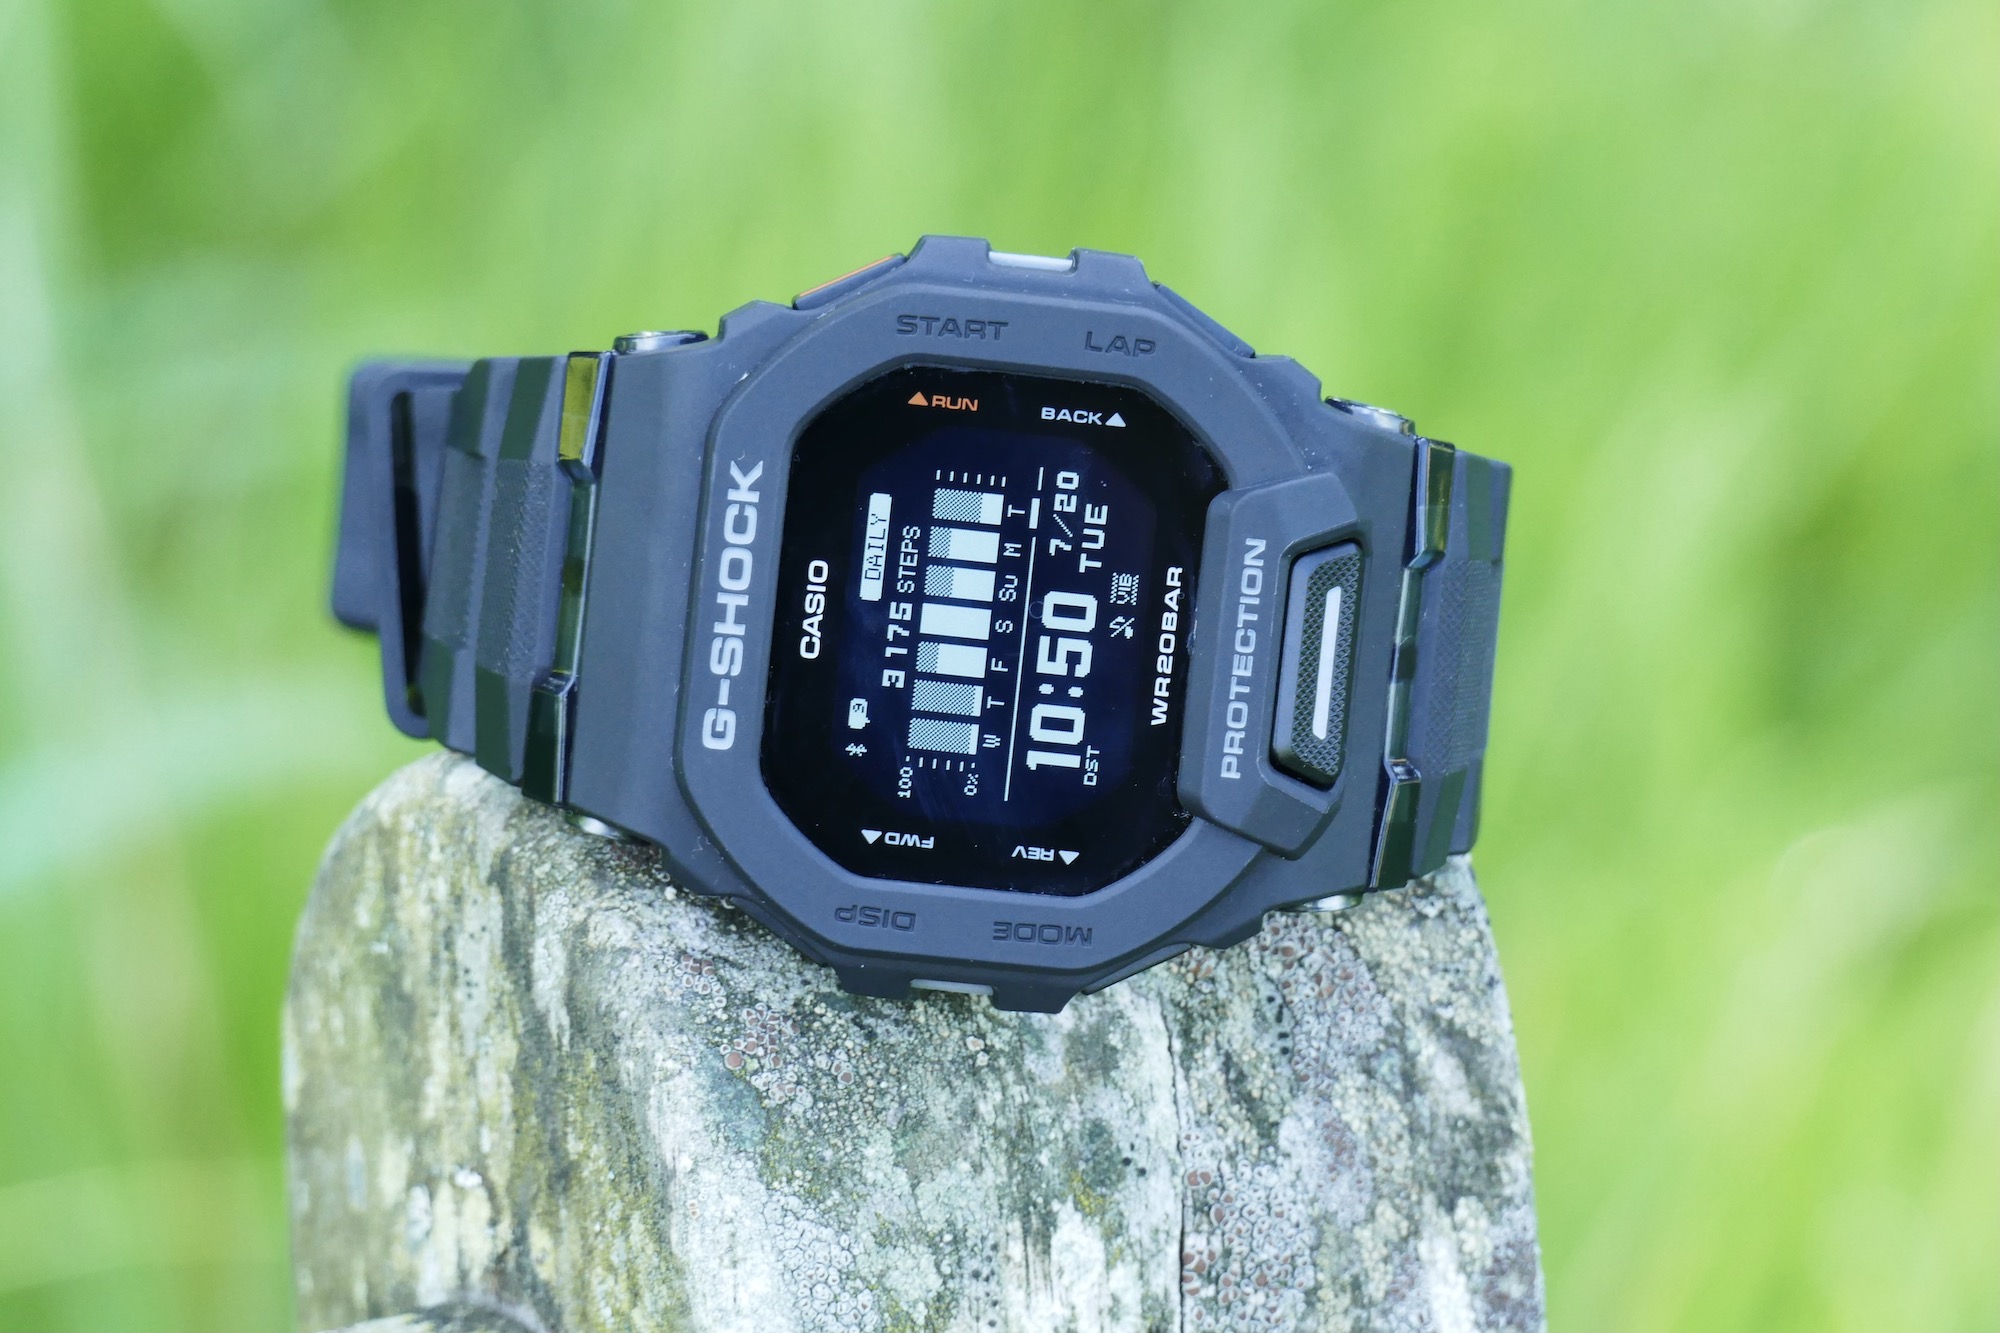 Digital Balanced Perfectly Trends G-Shock GBD-200 Casio Review: |